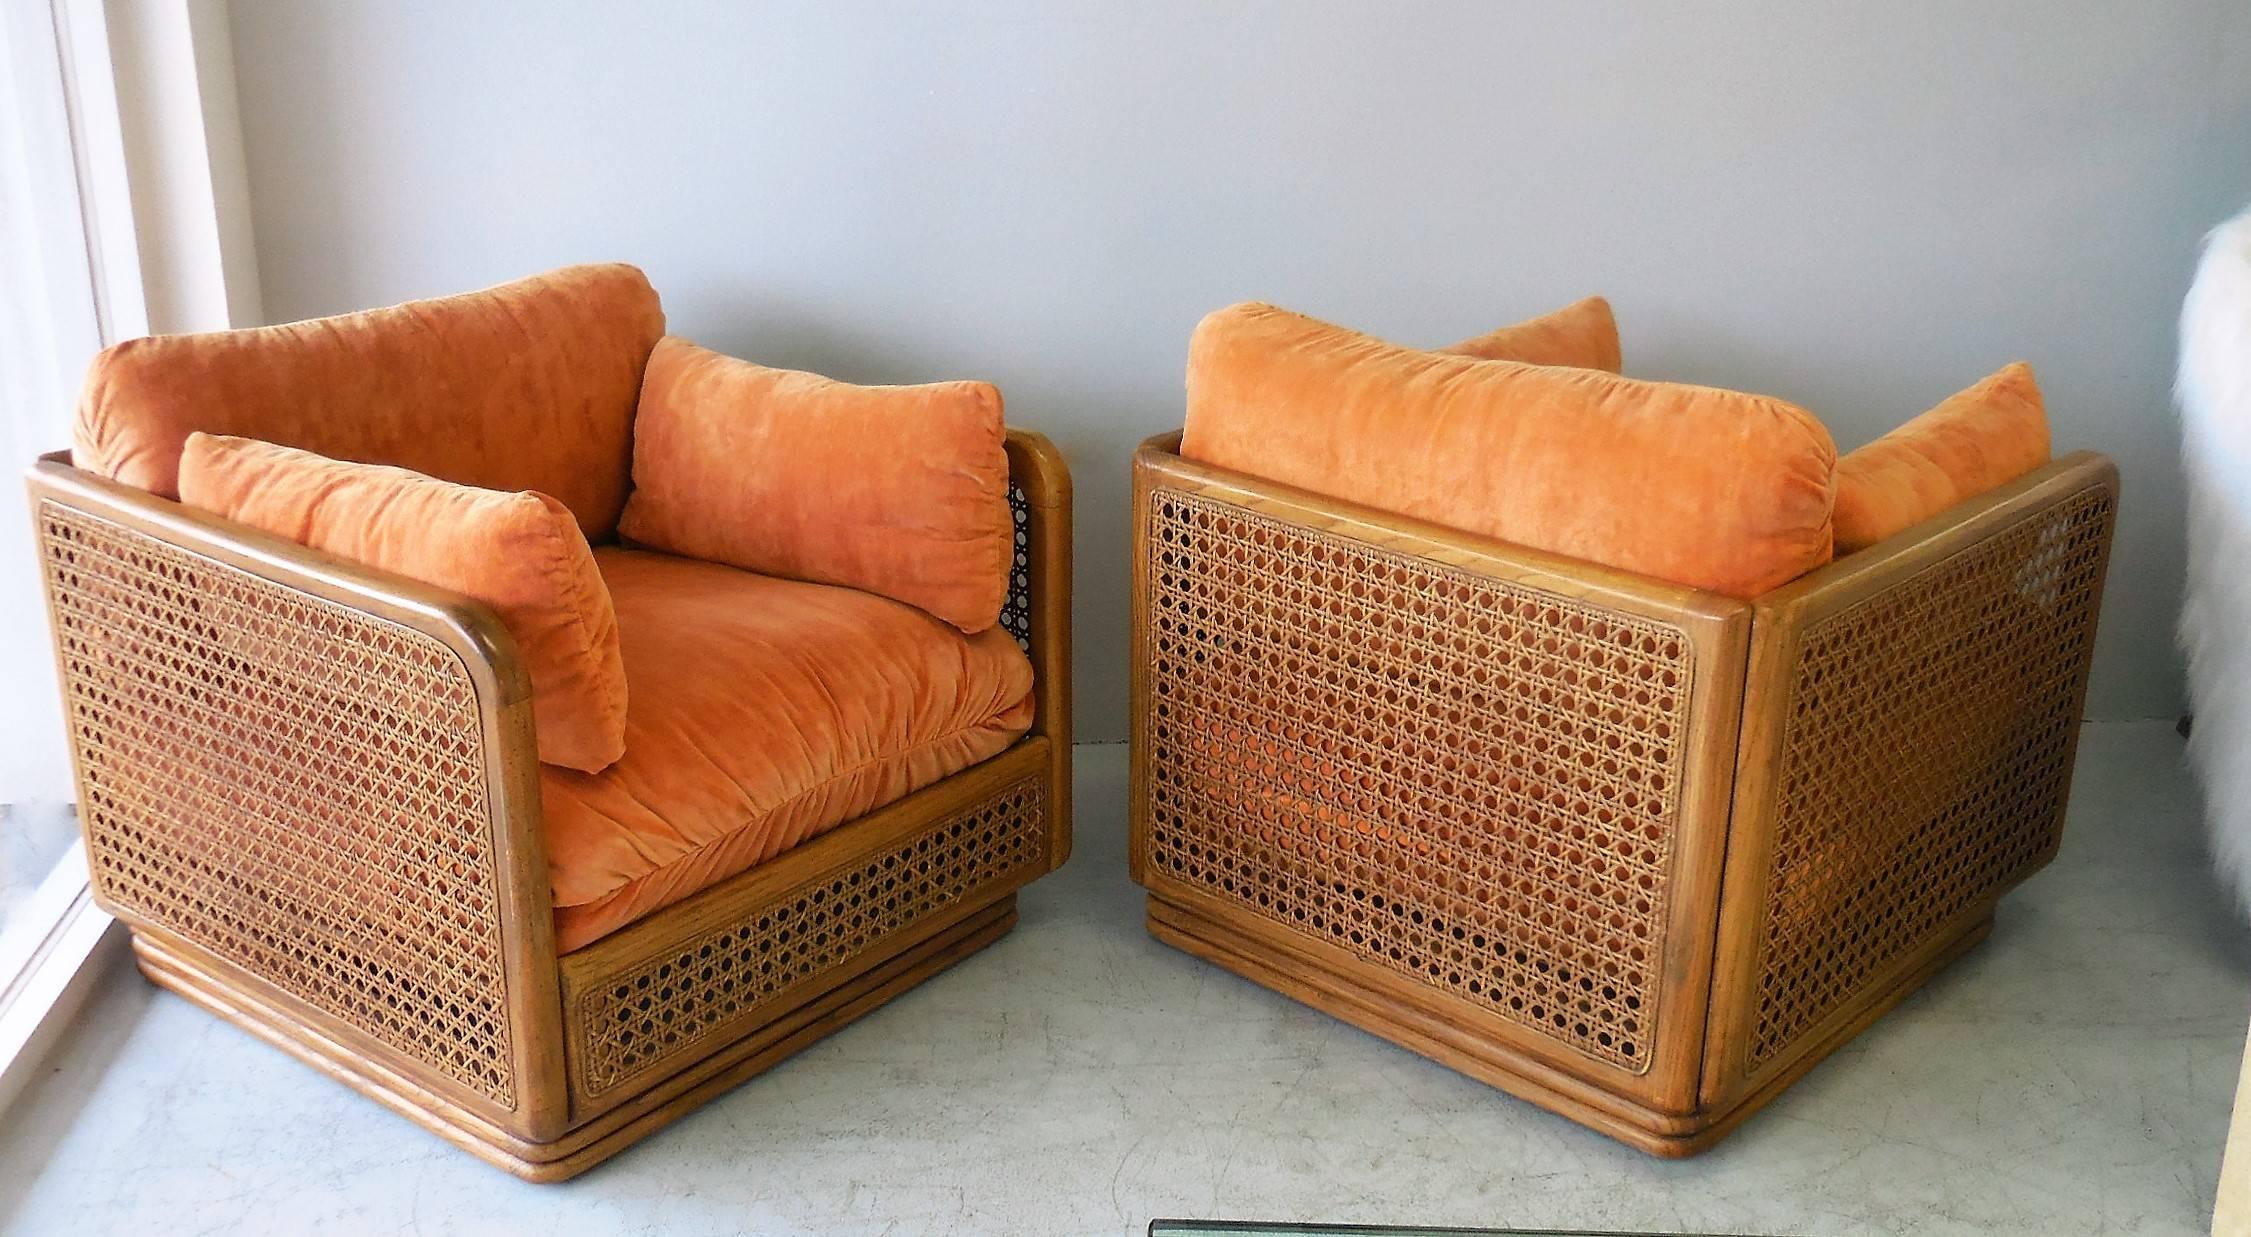 A handsome pair of wood and cane 1970s cube lounge chairs. Wood frames with very large open weaves. The cushions and pillows are removable. Clean simple design, tropical minimalism at its best.